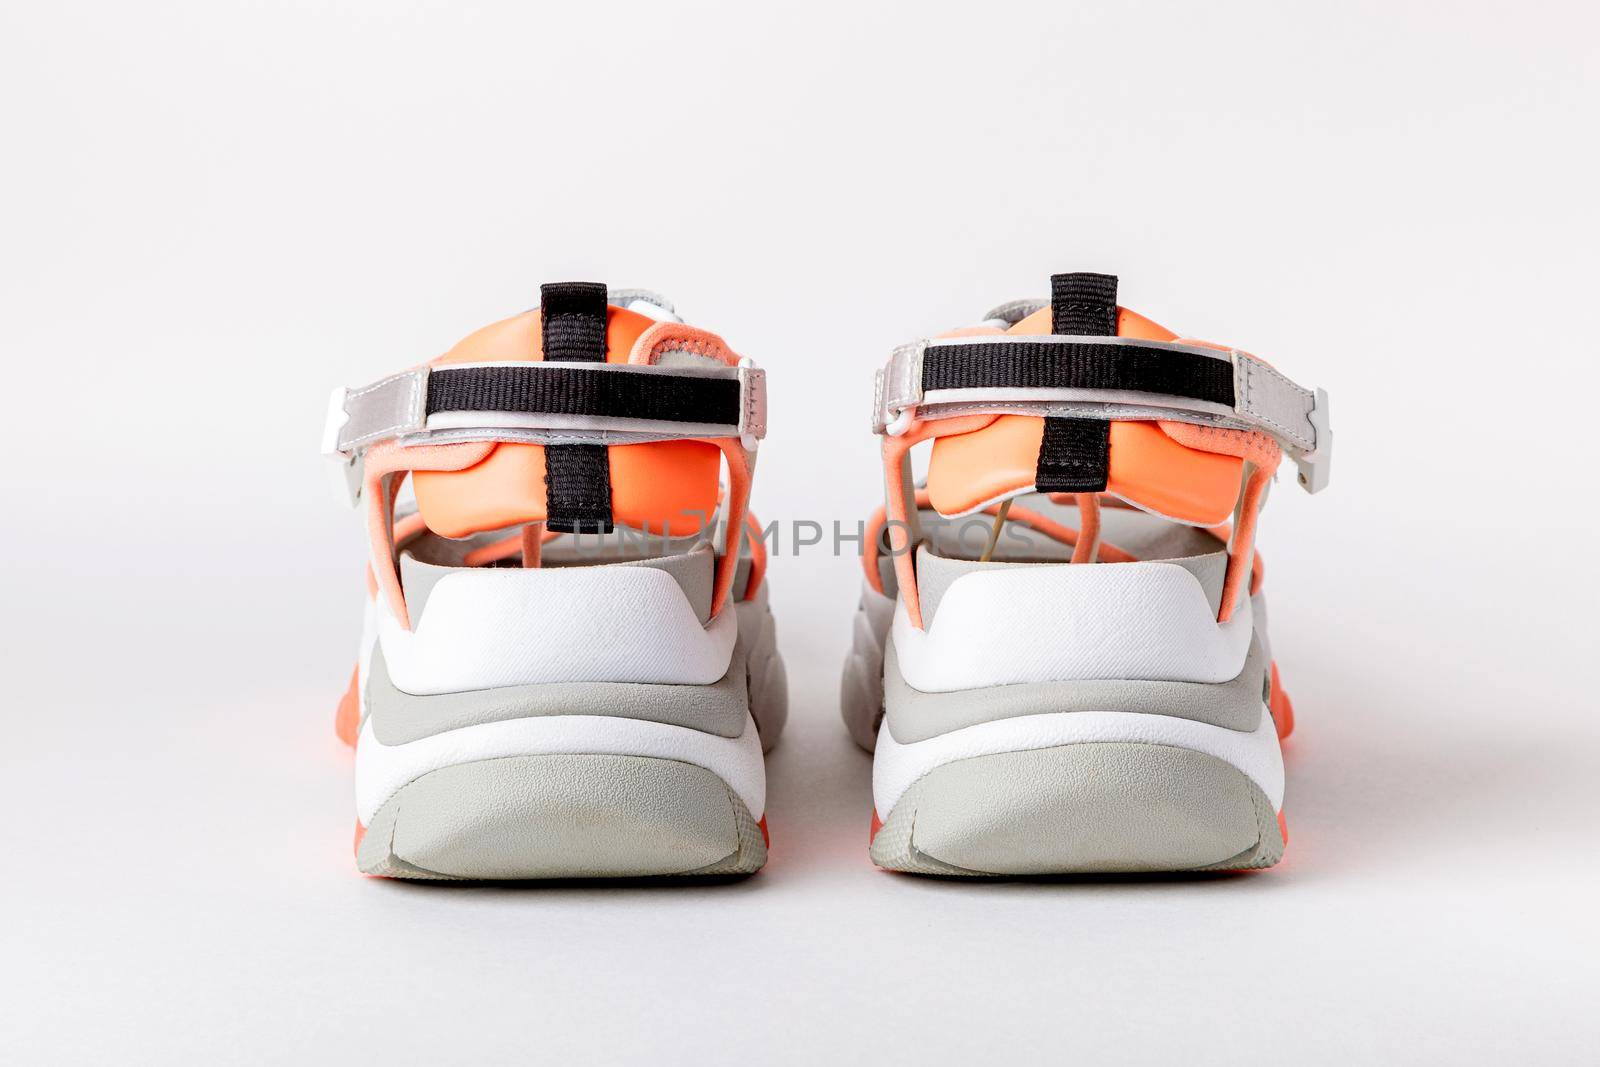 Women's, fashionable, sports sandals with orange accents on a white background. New youth shoes for girls.